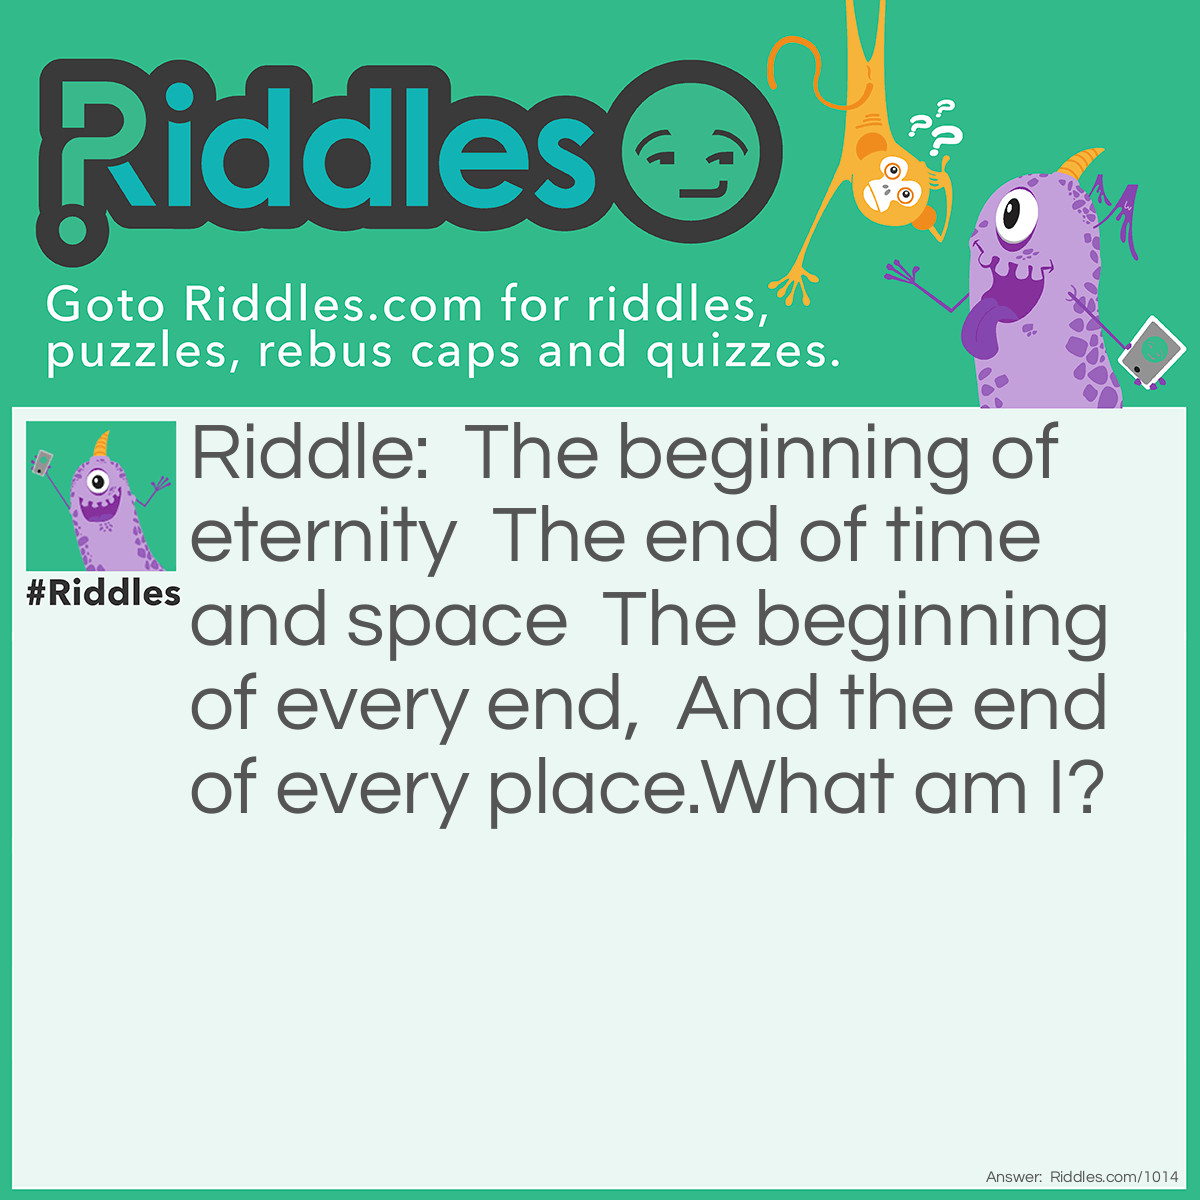 Riddle: The beginning of eternity  The end of time and space  The beginning of every end,  And the end of every place.What am I? Answer: The letter E.